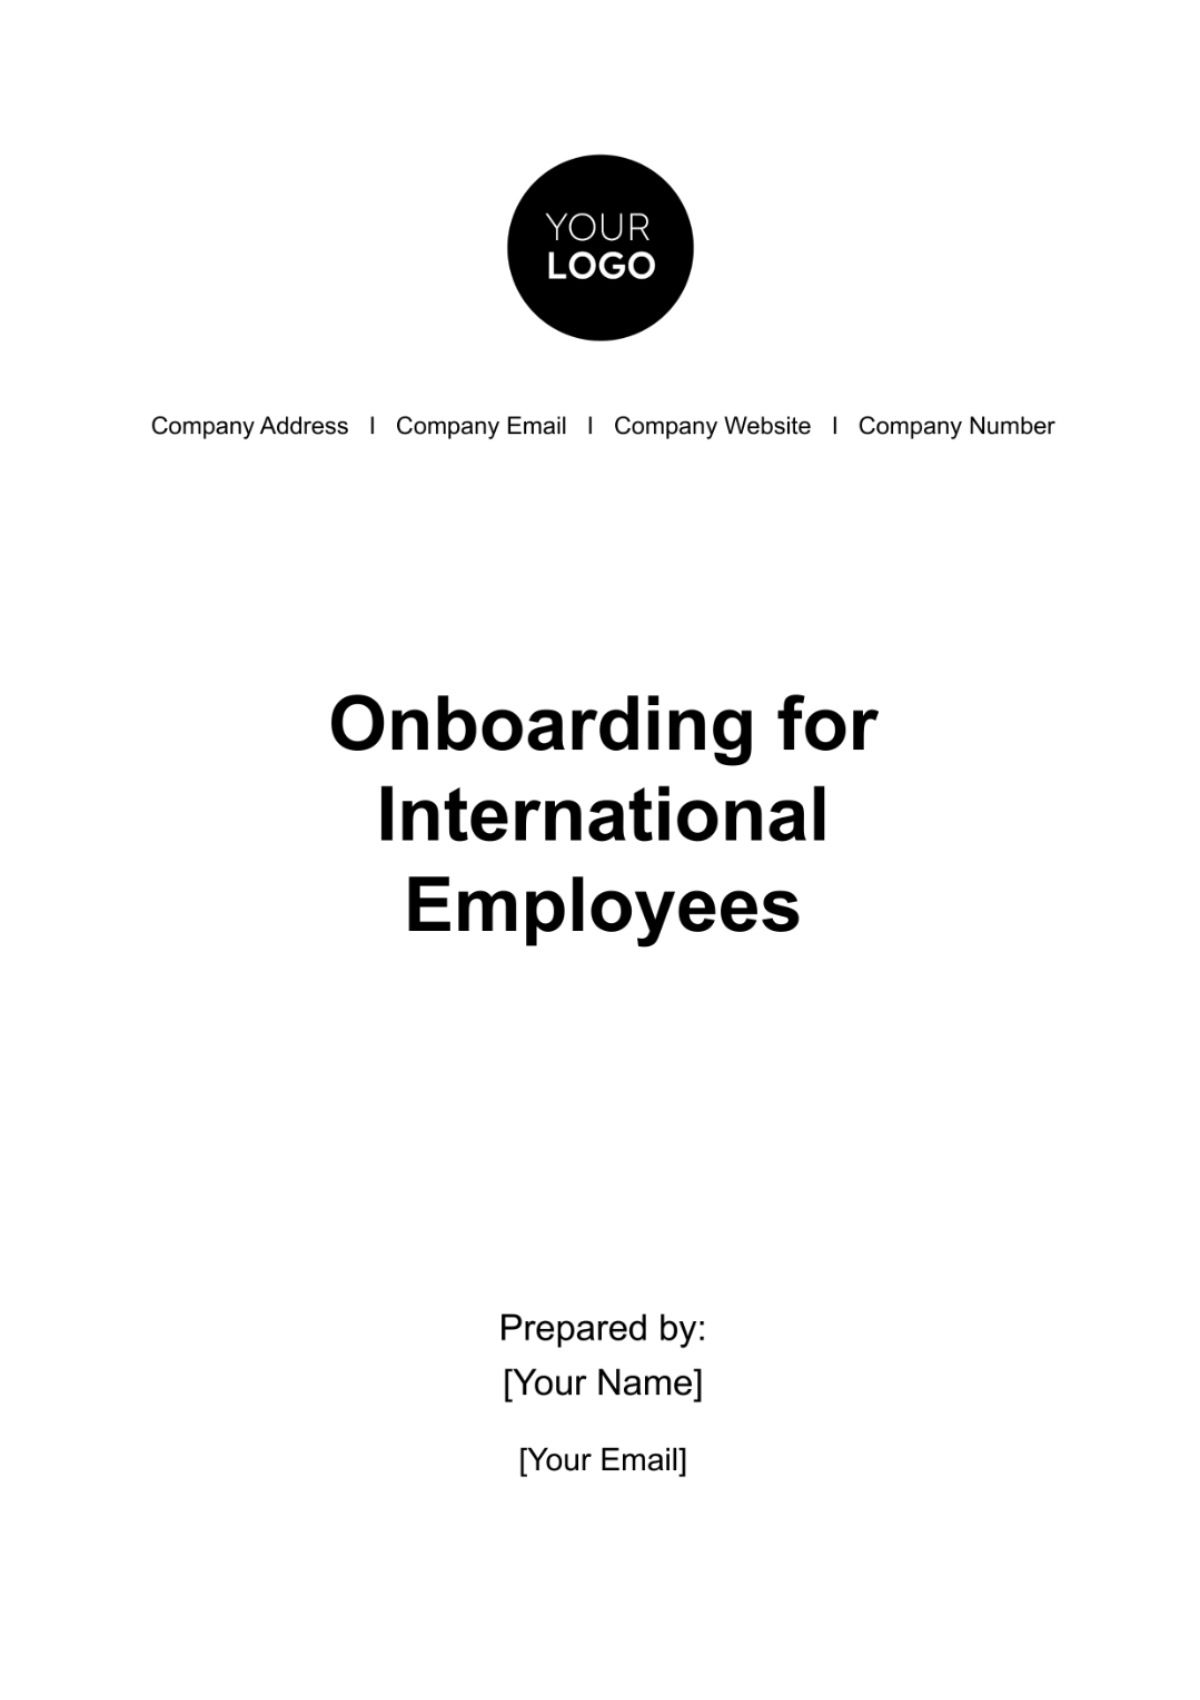 Free Onboarding for International Employees HR Template